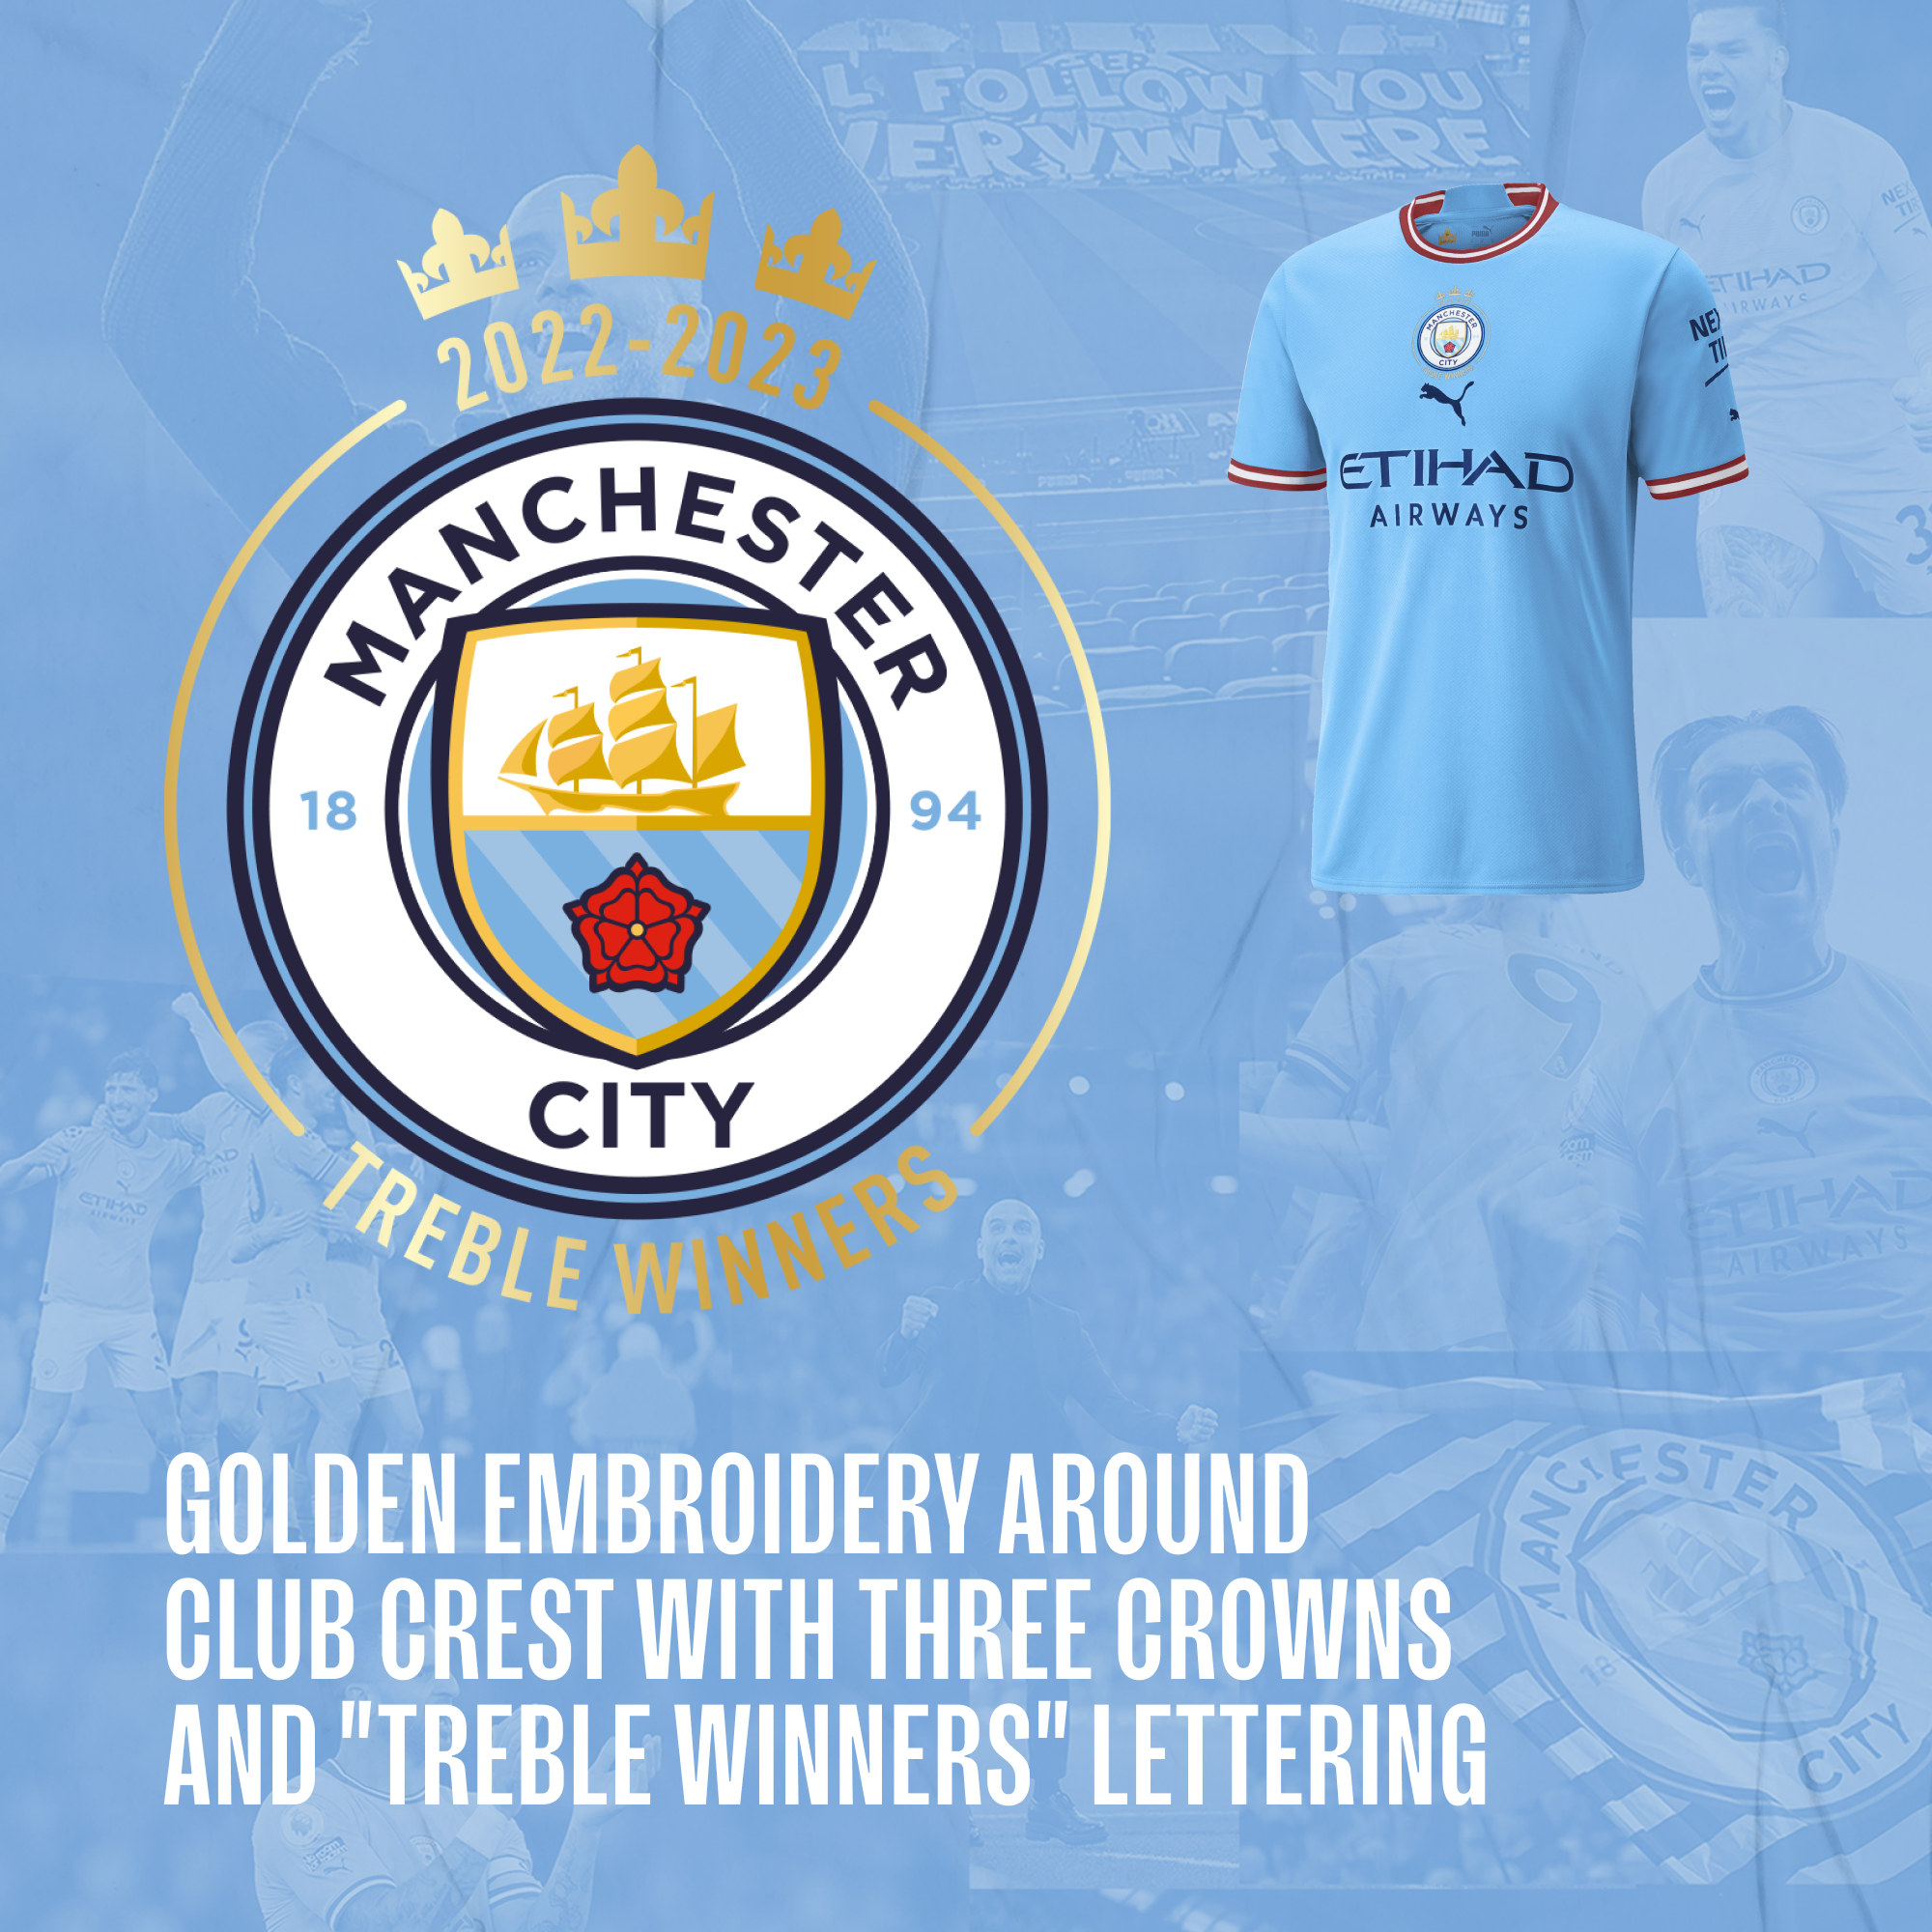 Manchester City Treble Winners Commemorative Jersey 2022/23 In Gift Box |  Official Man City Store